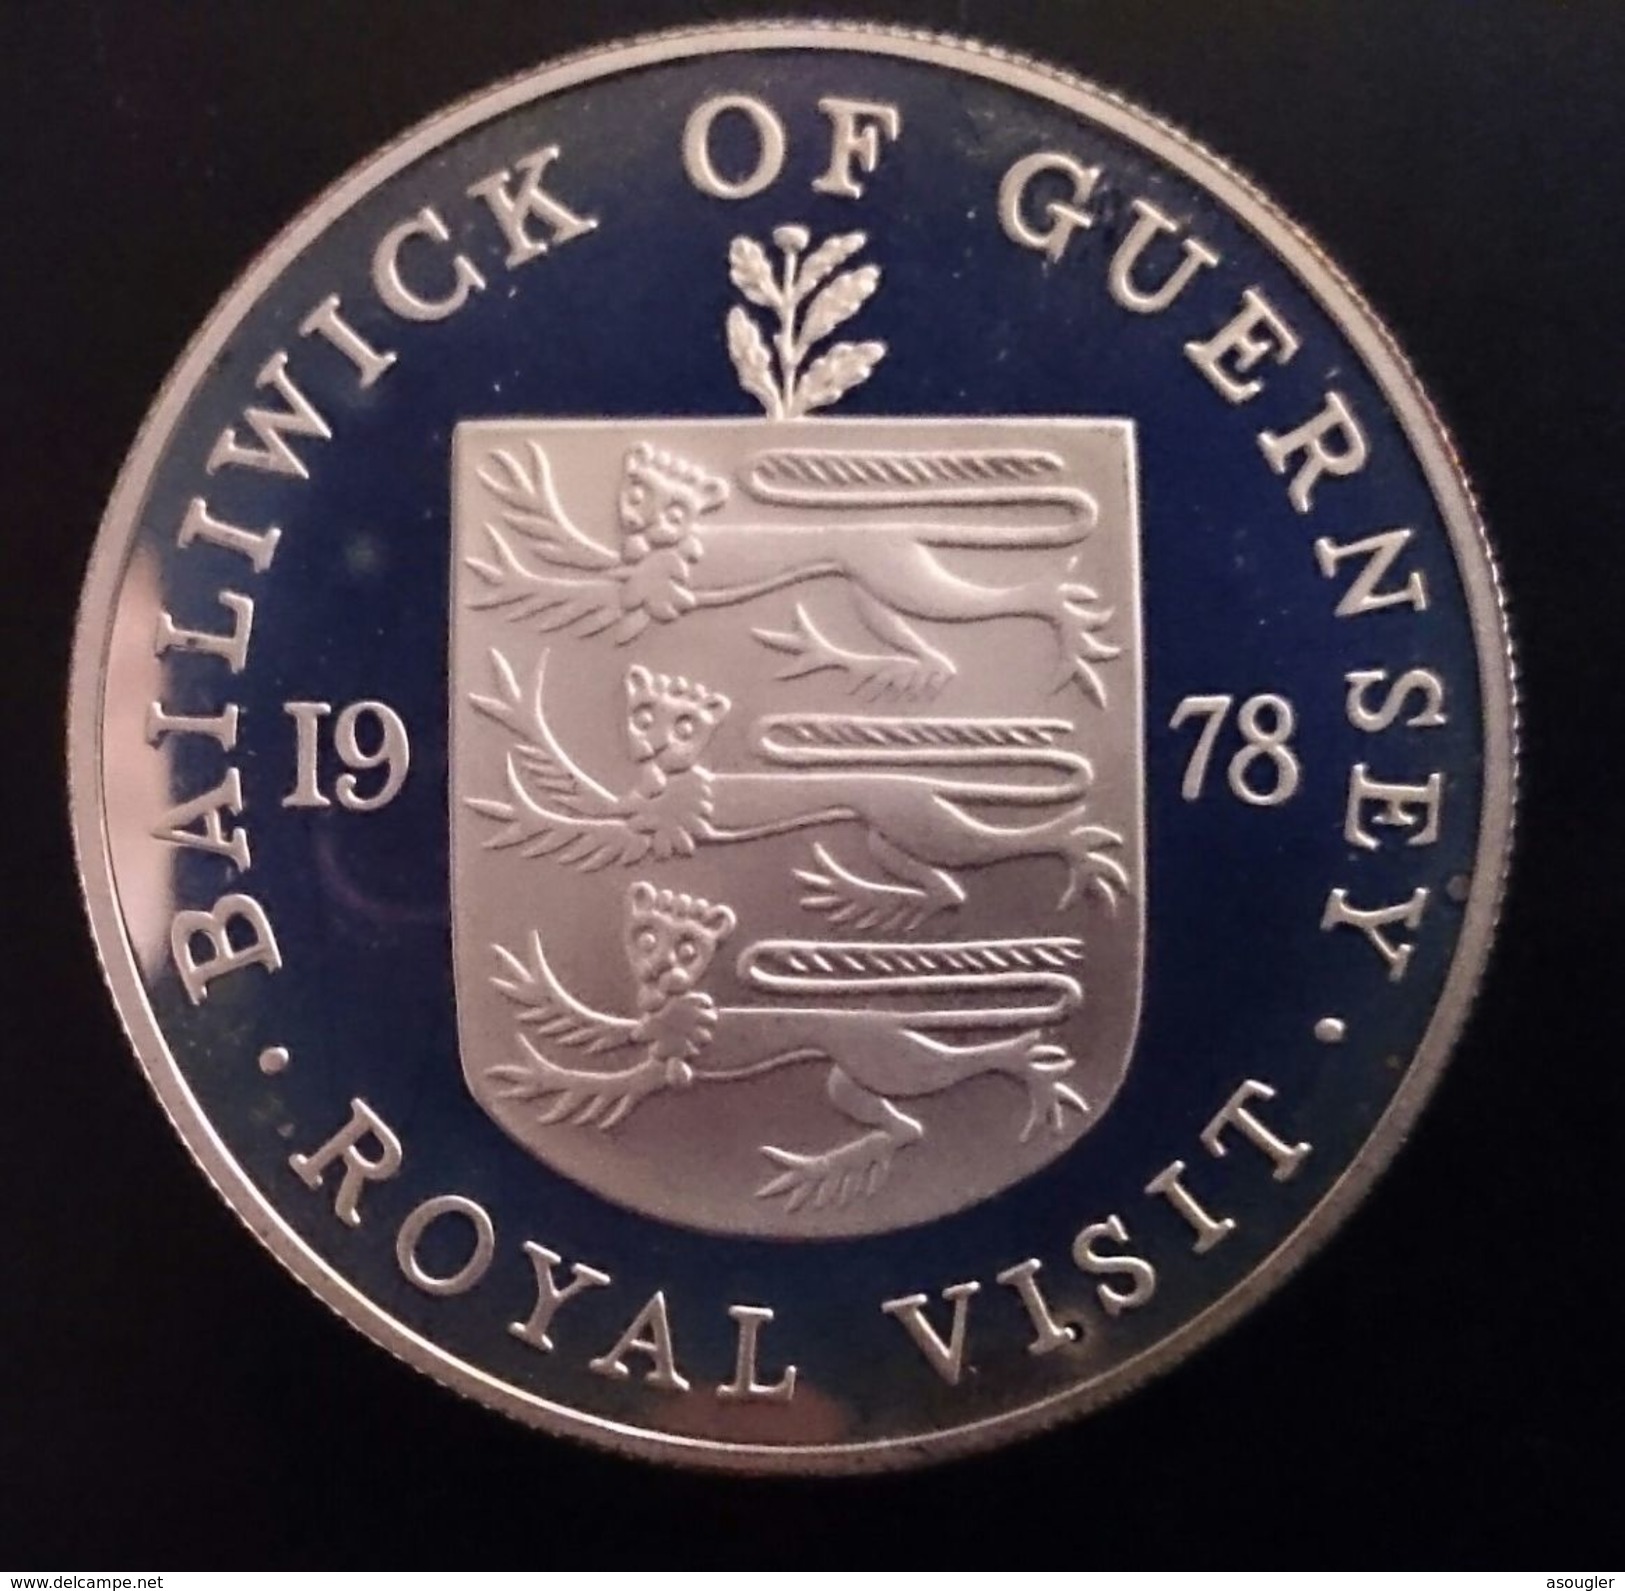 Guernsey 25 PENCE 1978 SILVER PROOF "Royal Visit" Free Shipping Via Registered Air Mail - Guernsey